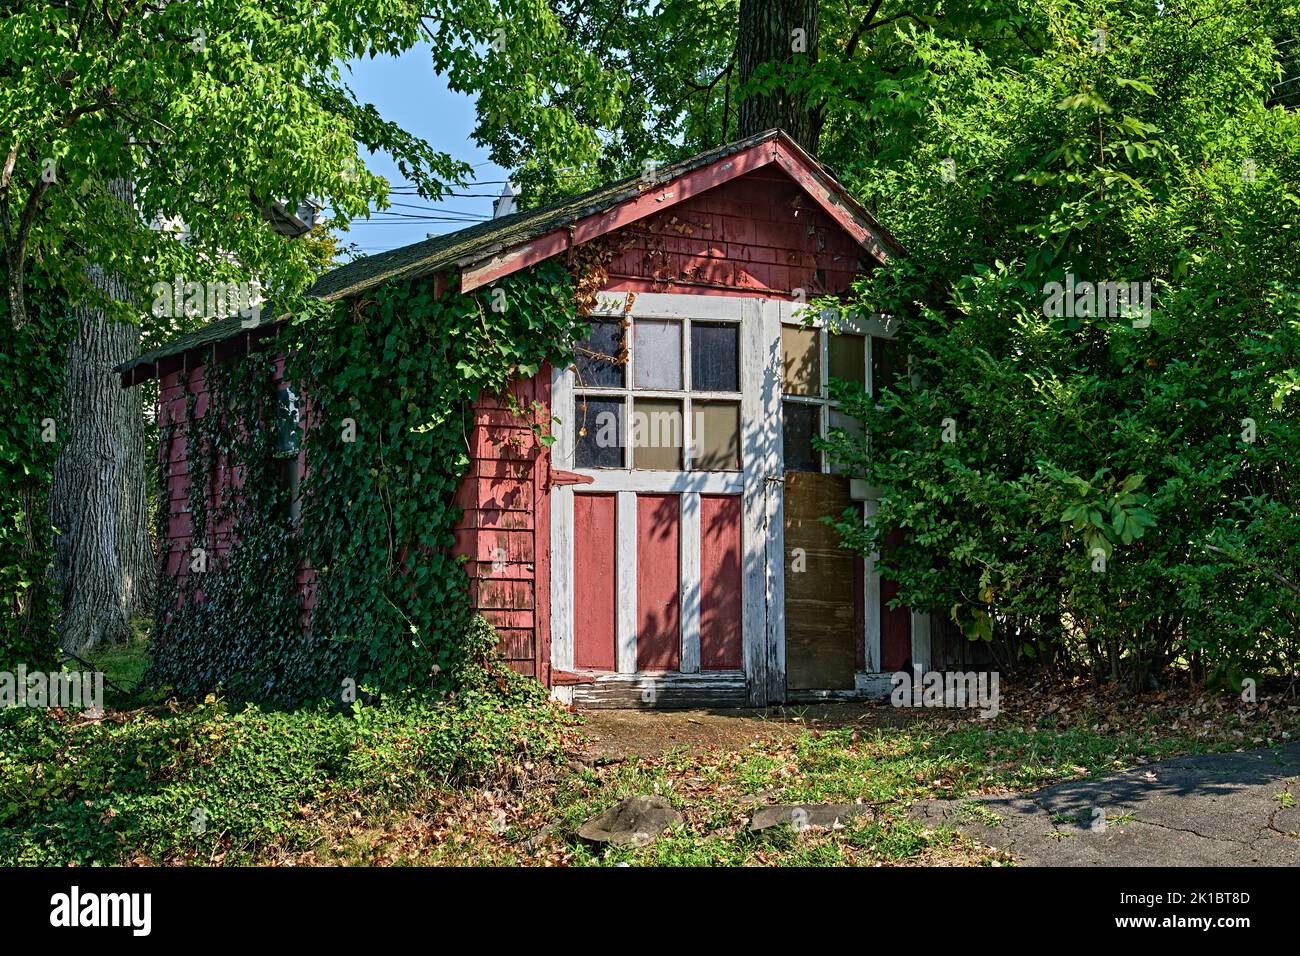 A cute old red vintage car garage in the 1940's style. With ivy growing up one side. Stock Photo